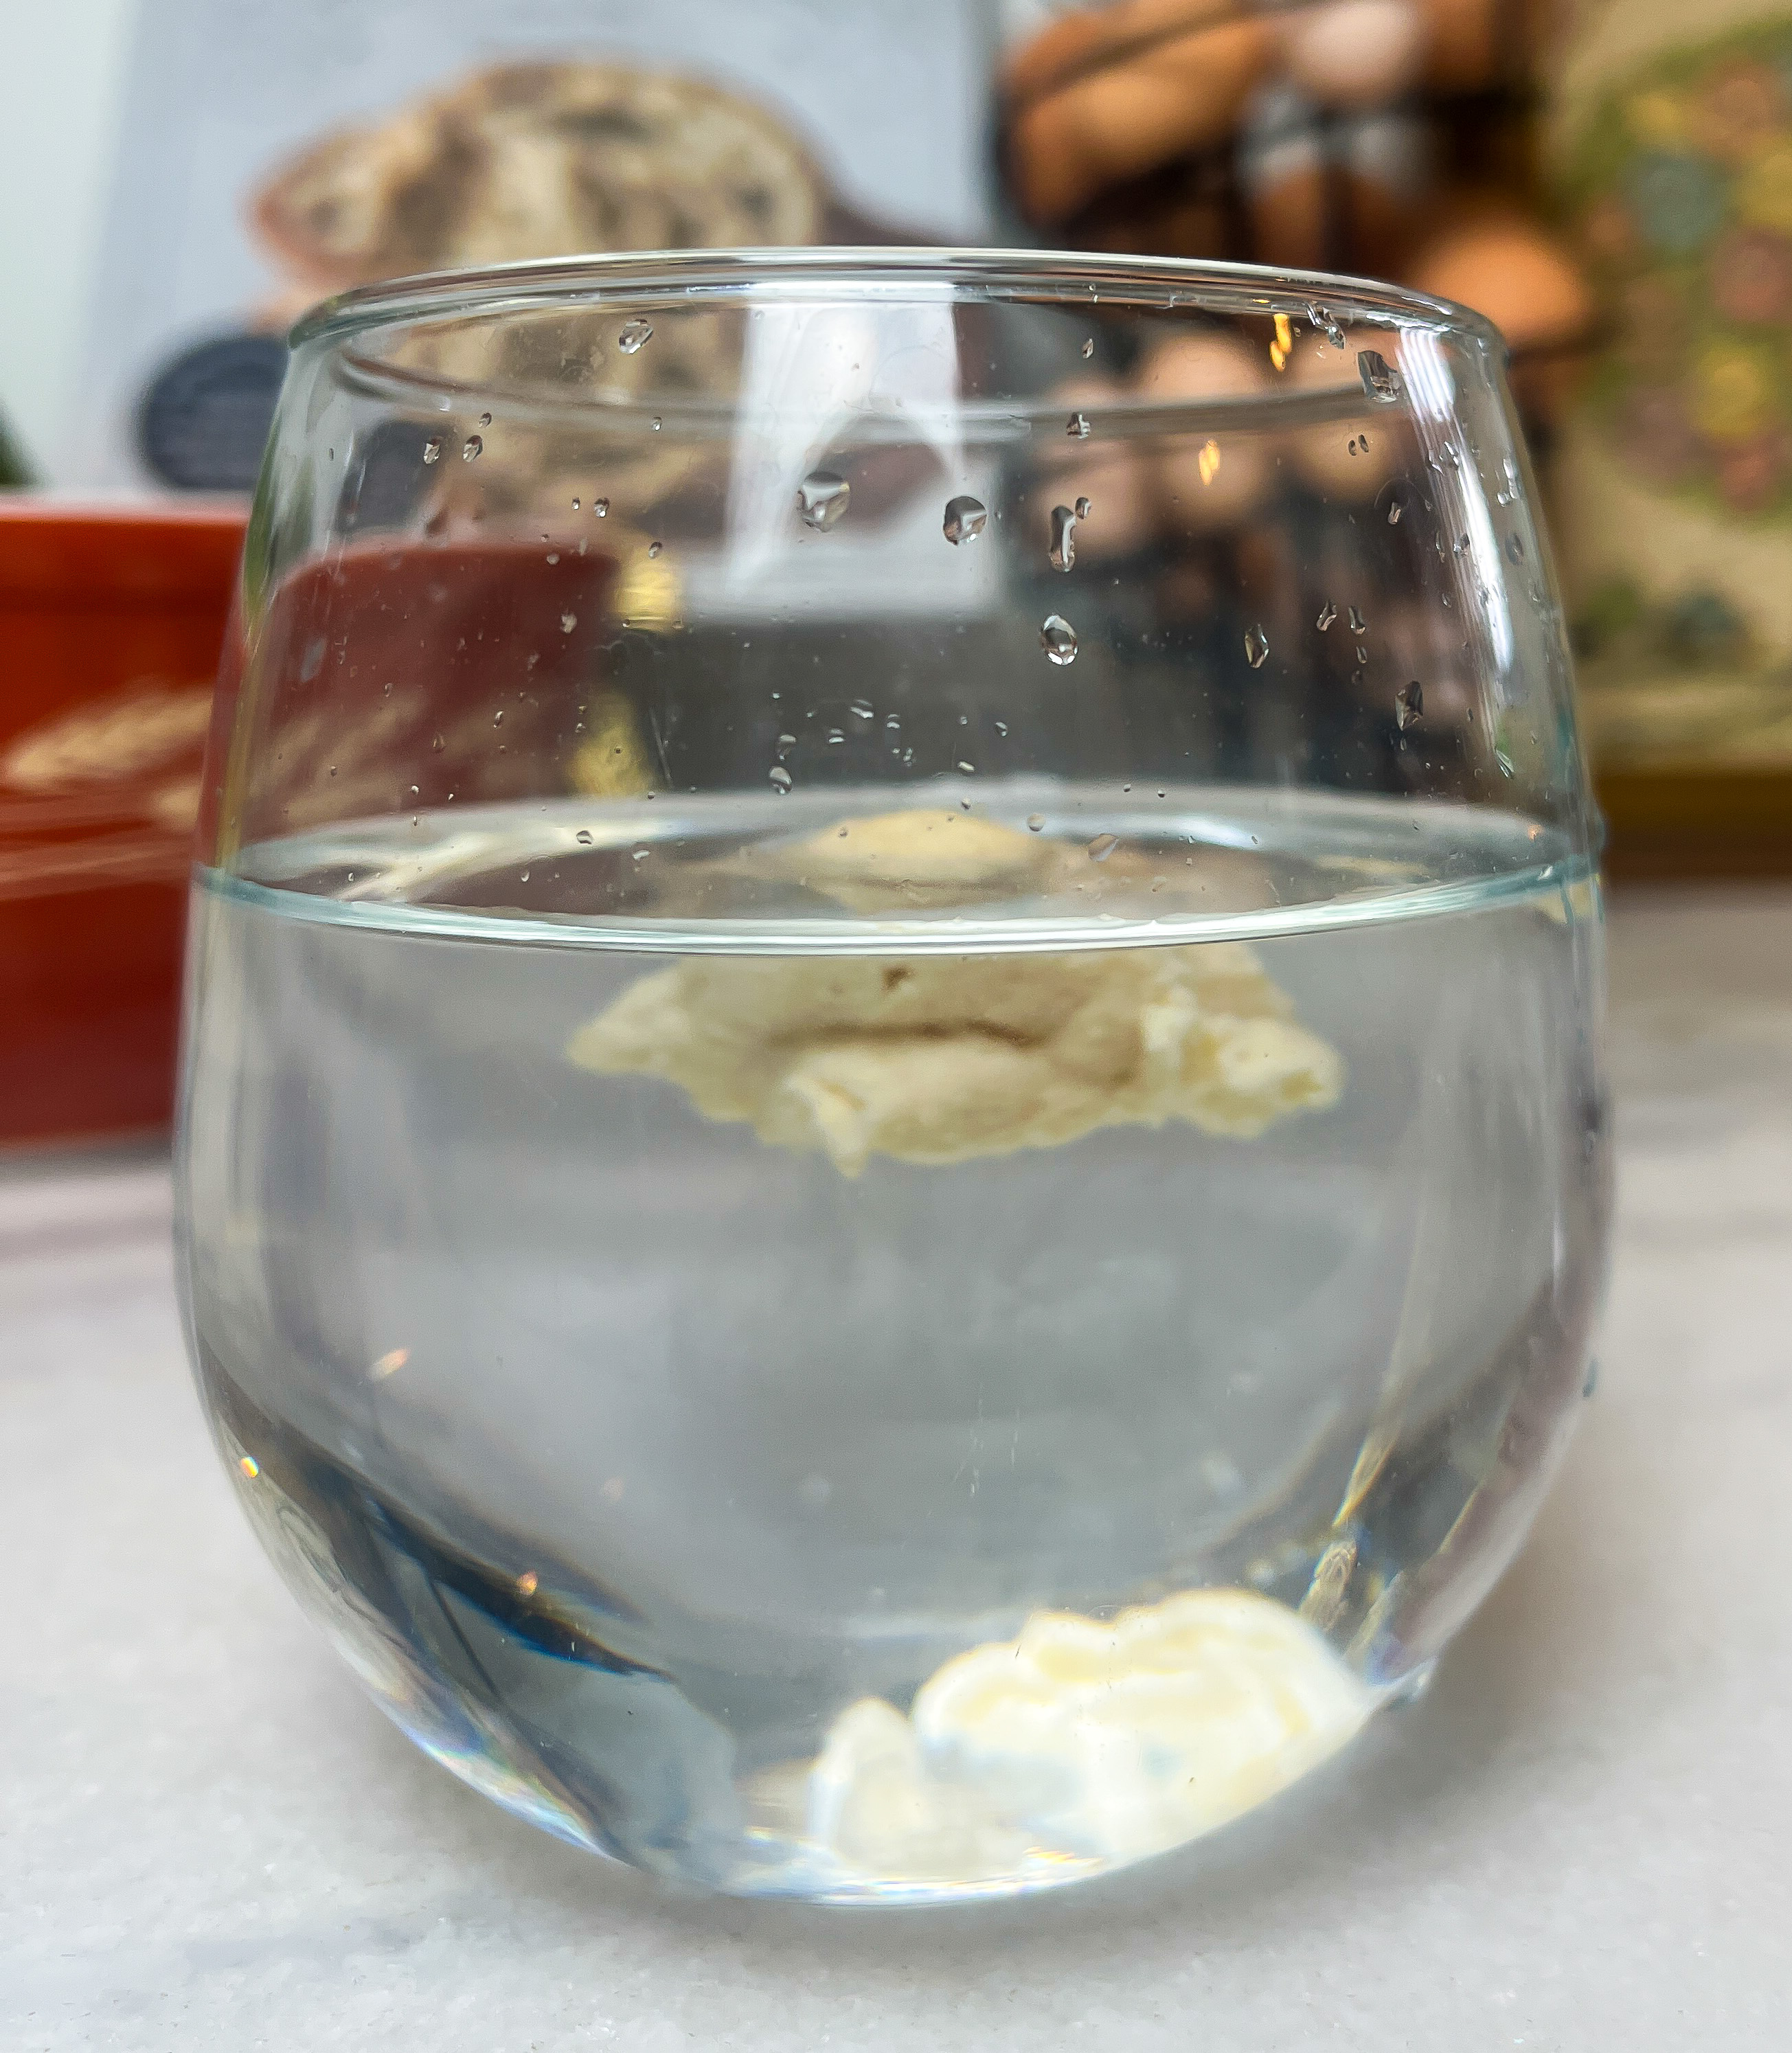 stemless wine glass with water and sourdough starter floating in the water